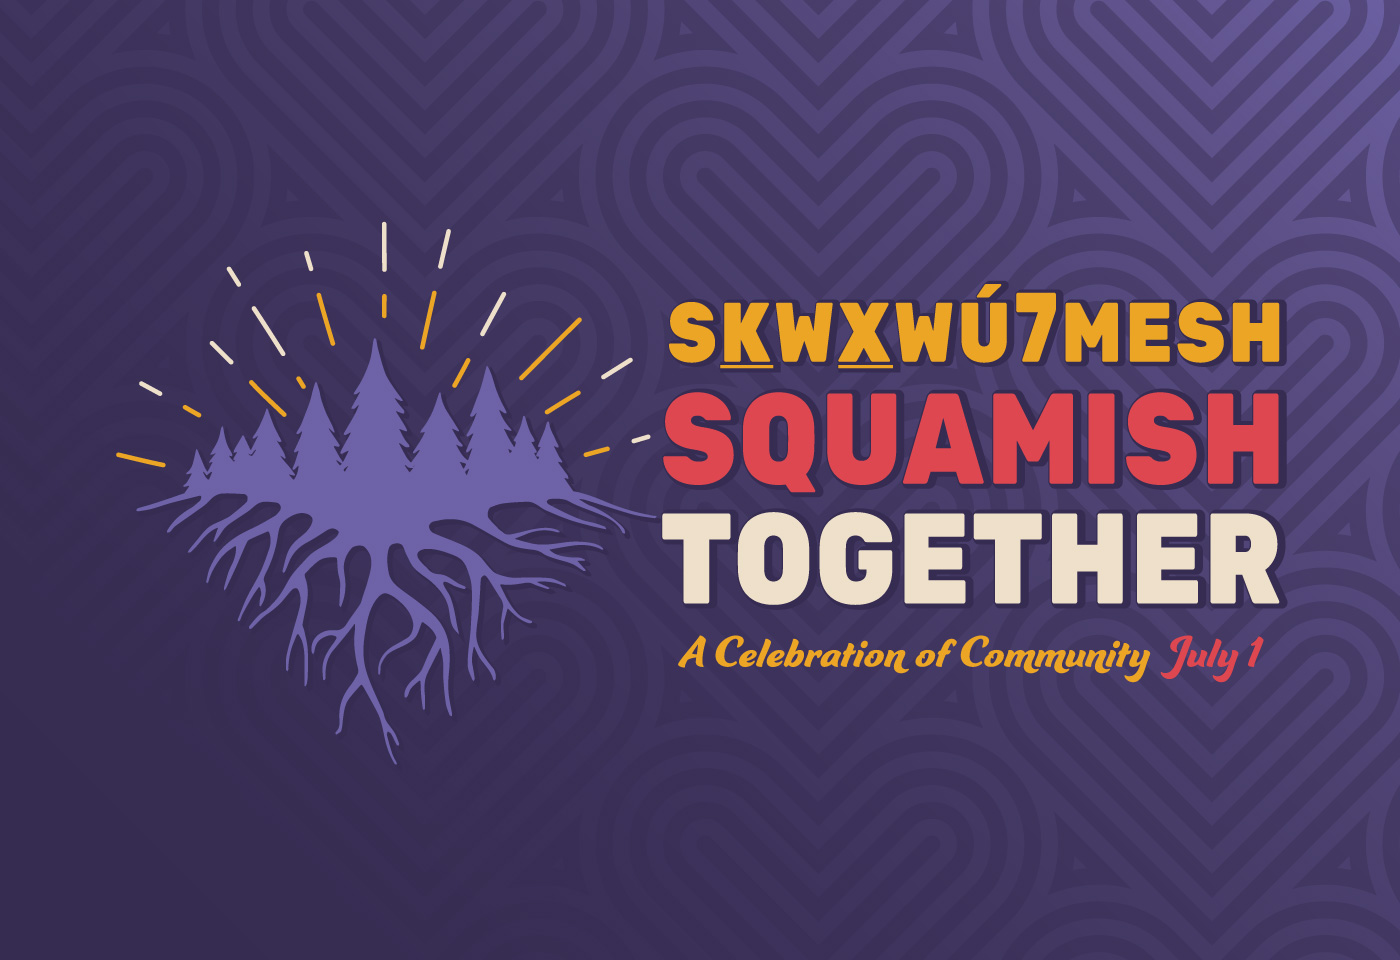 https://www.downtownsquamish.com/wp-content/uploads/2023/05/home-image.jpg